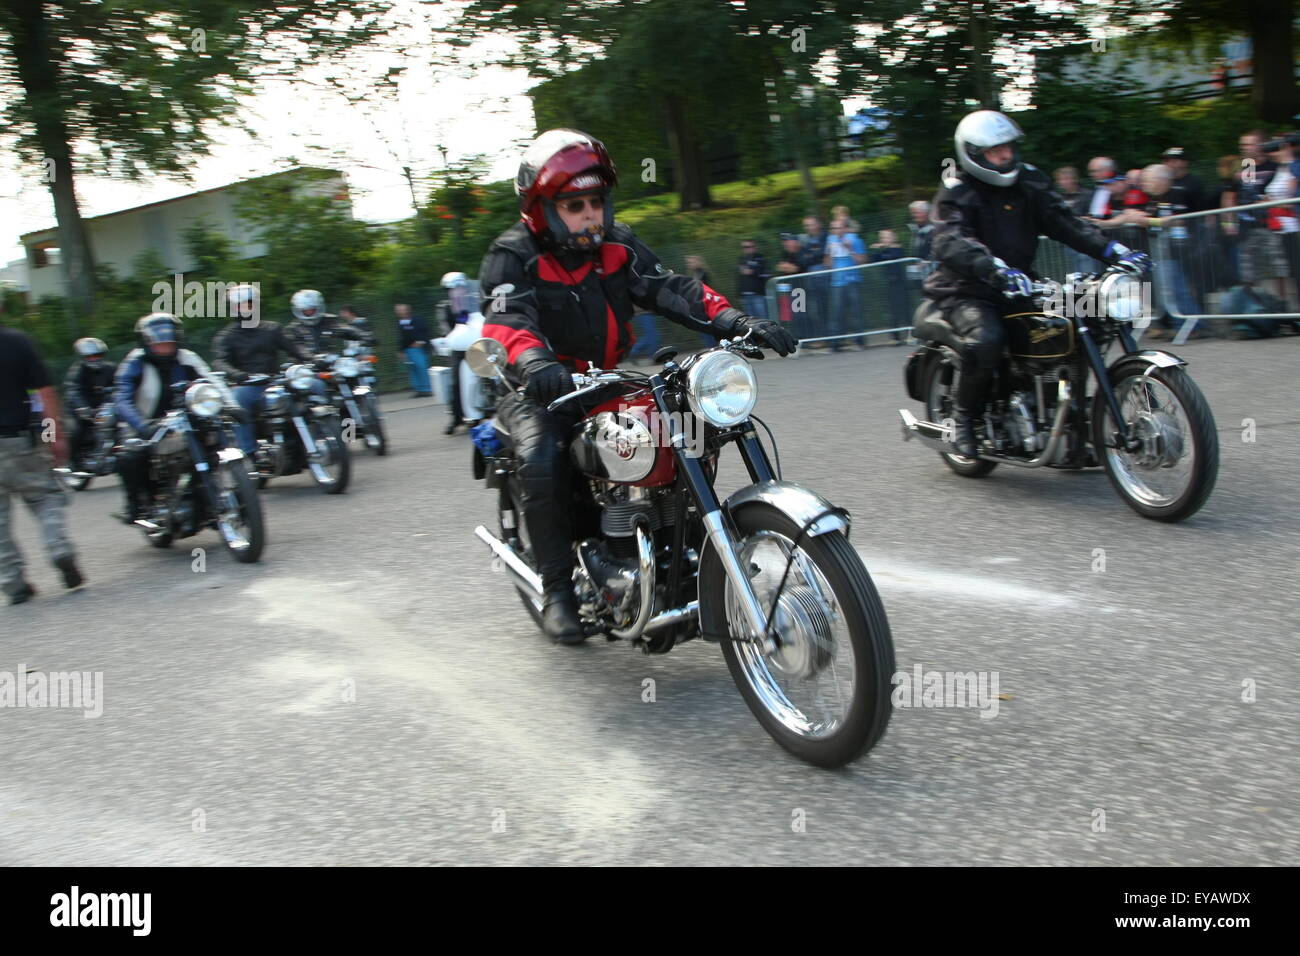 Classic bike fans from around the globe are gathering this weekend at the historic Cadwell Park motor racing circuit in Lincolnshire UK to witness the greatest gathering of historic racing motorcycles in recent history. Stock Photo